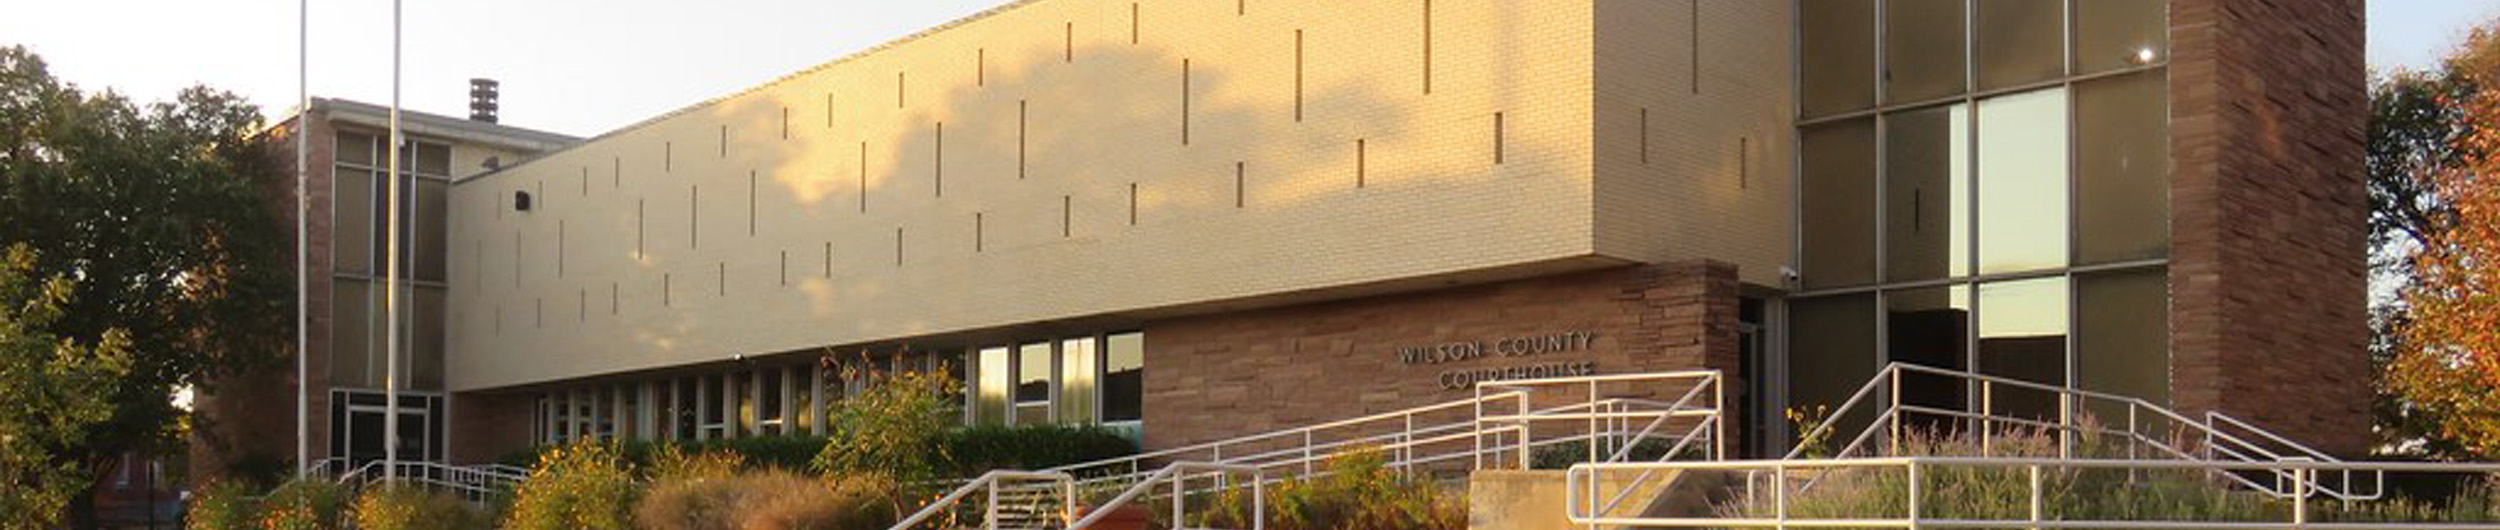 Wilson County District Court